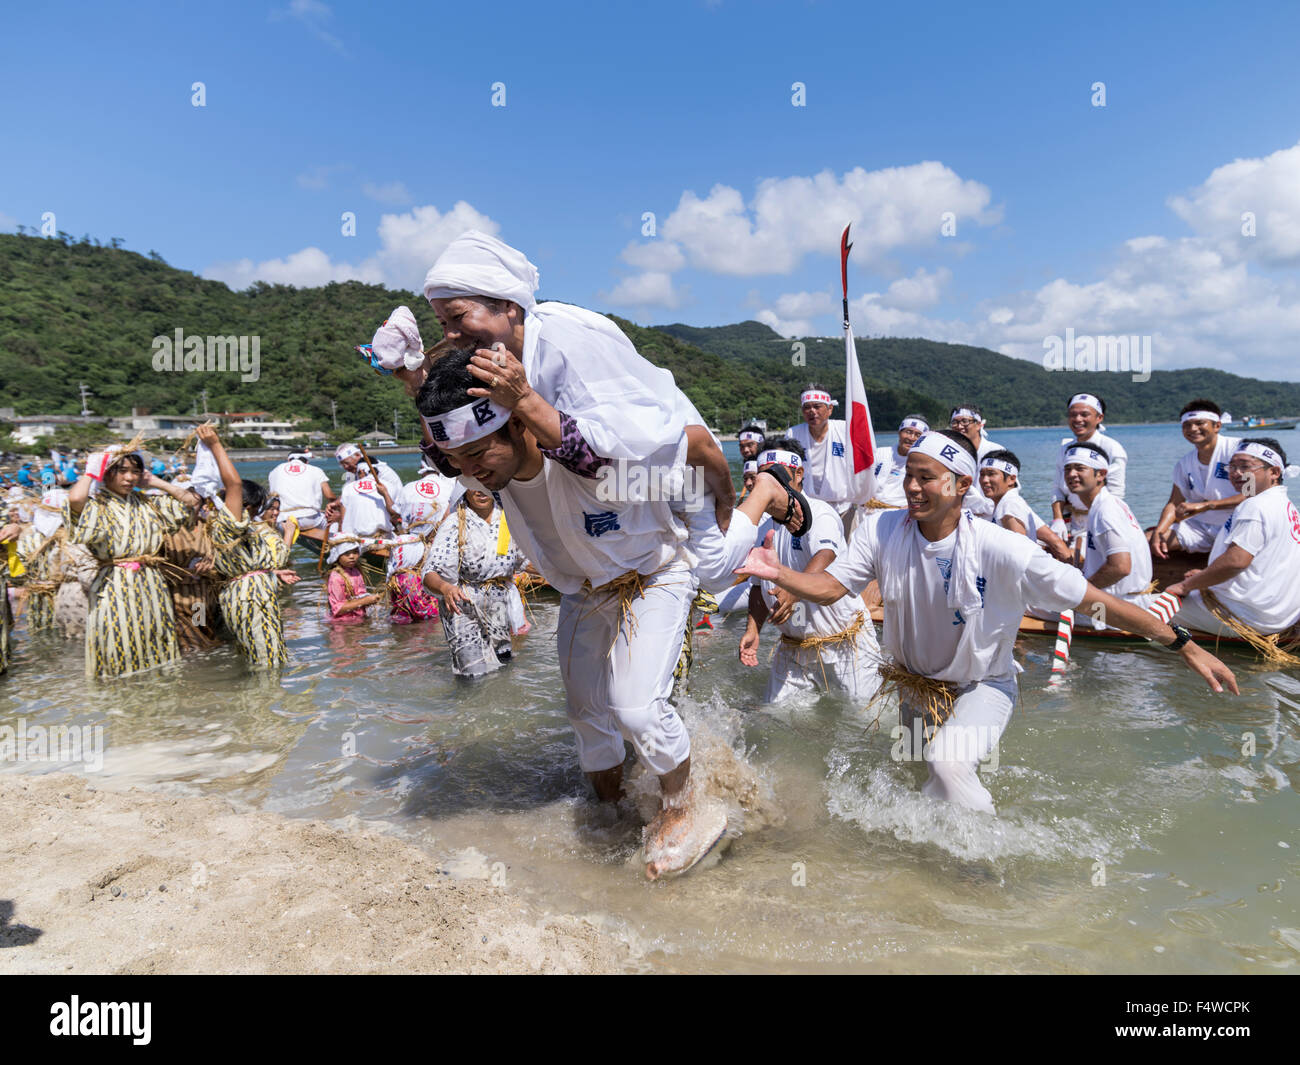 Shioya Ungami, an annual festival in Ogimi Village, Okinawa. Elderly yuta priestess helped from the dragon boat after race. Stock Photo